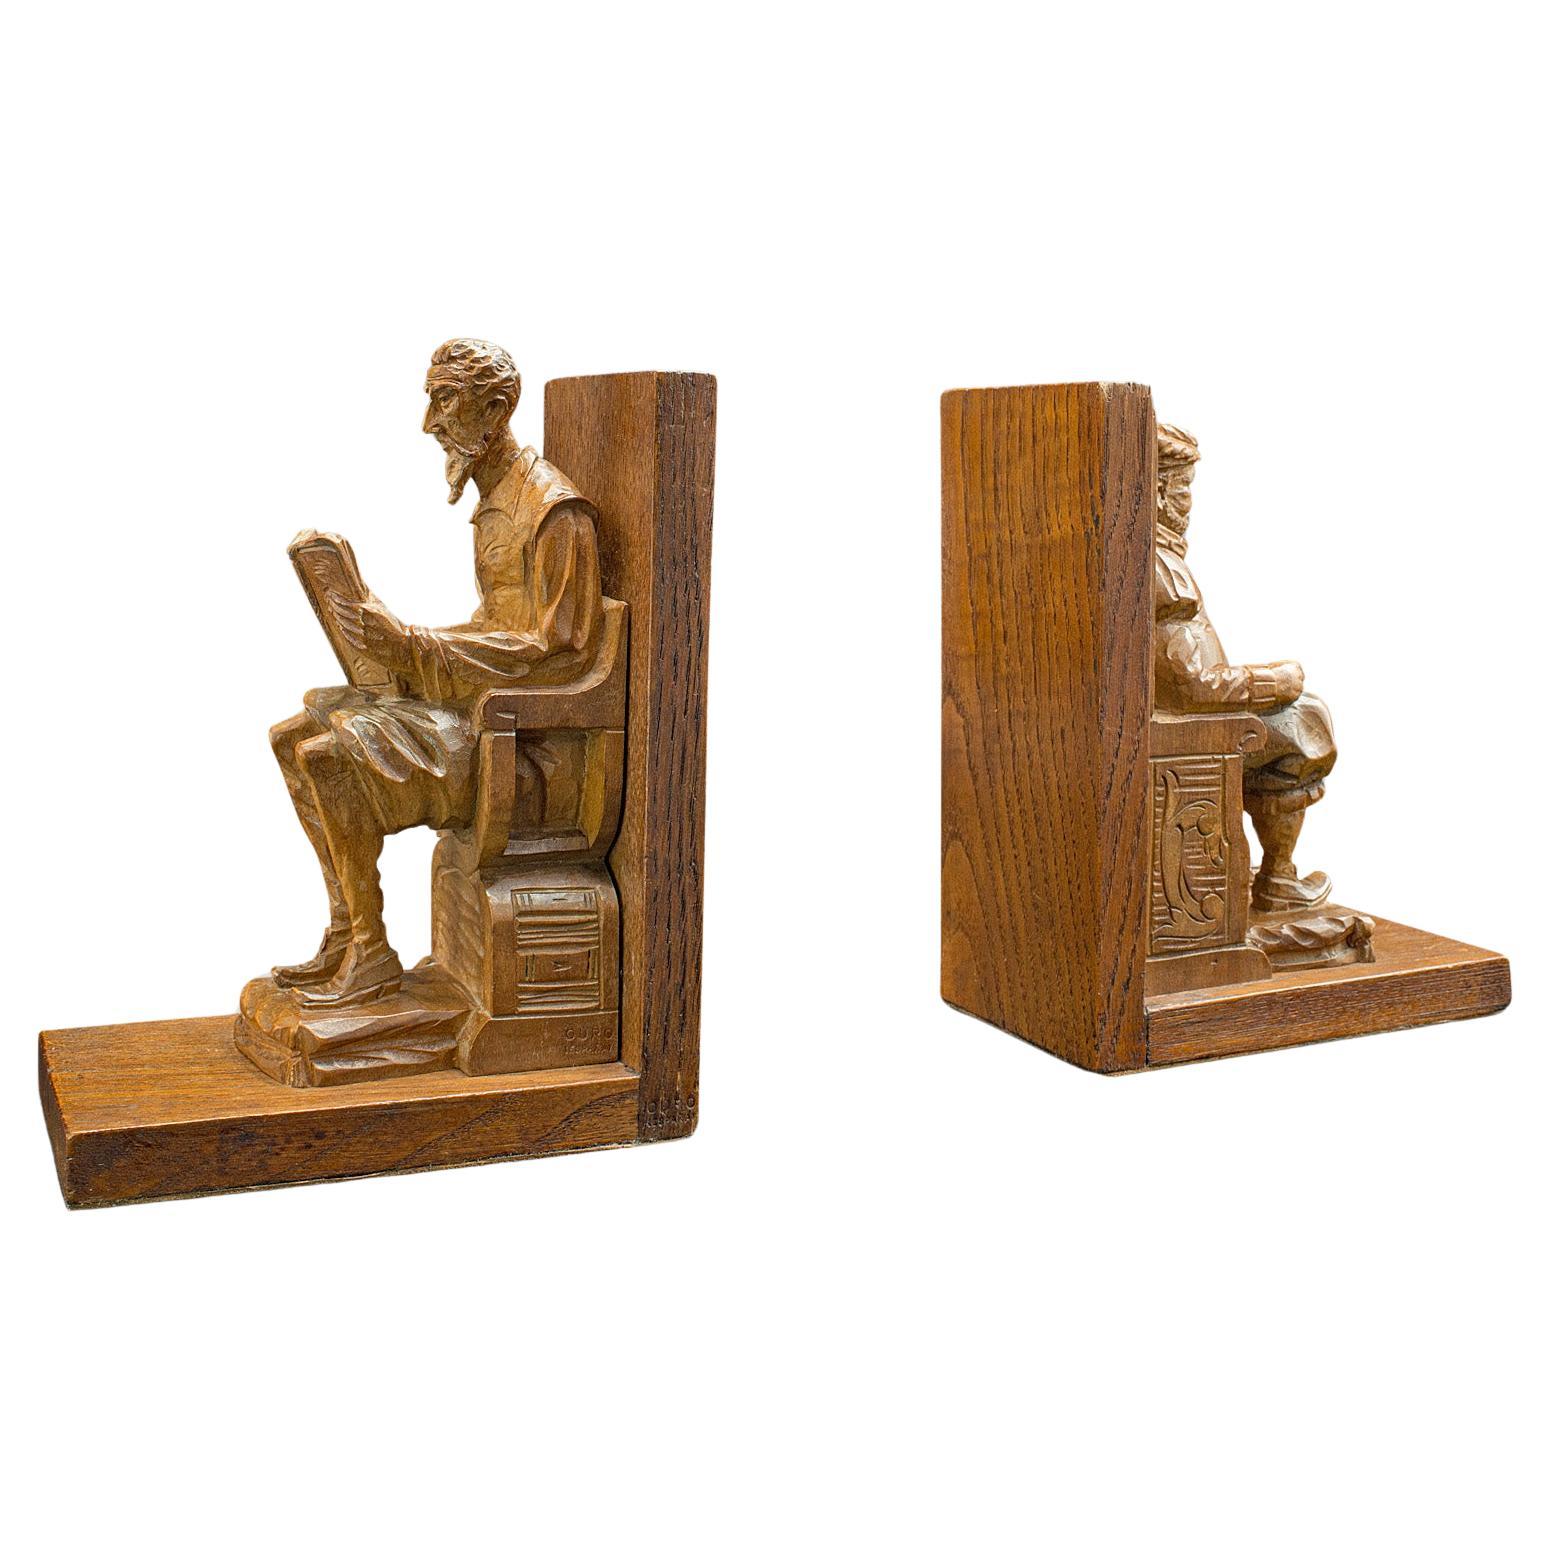 Pair Of Vintage Character Bookends, Spanish, Hand Carved, Book Rest, Don Quixote